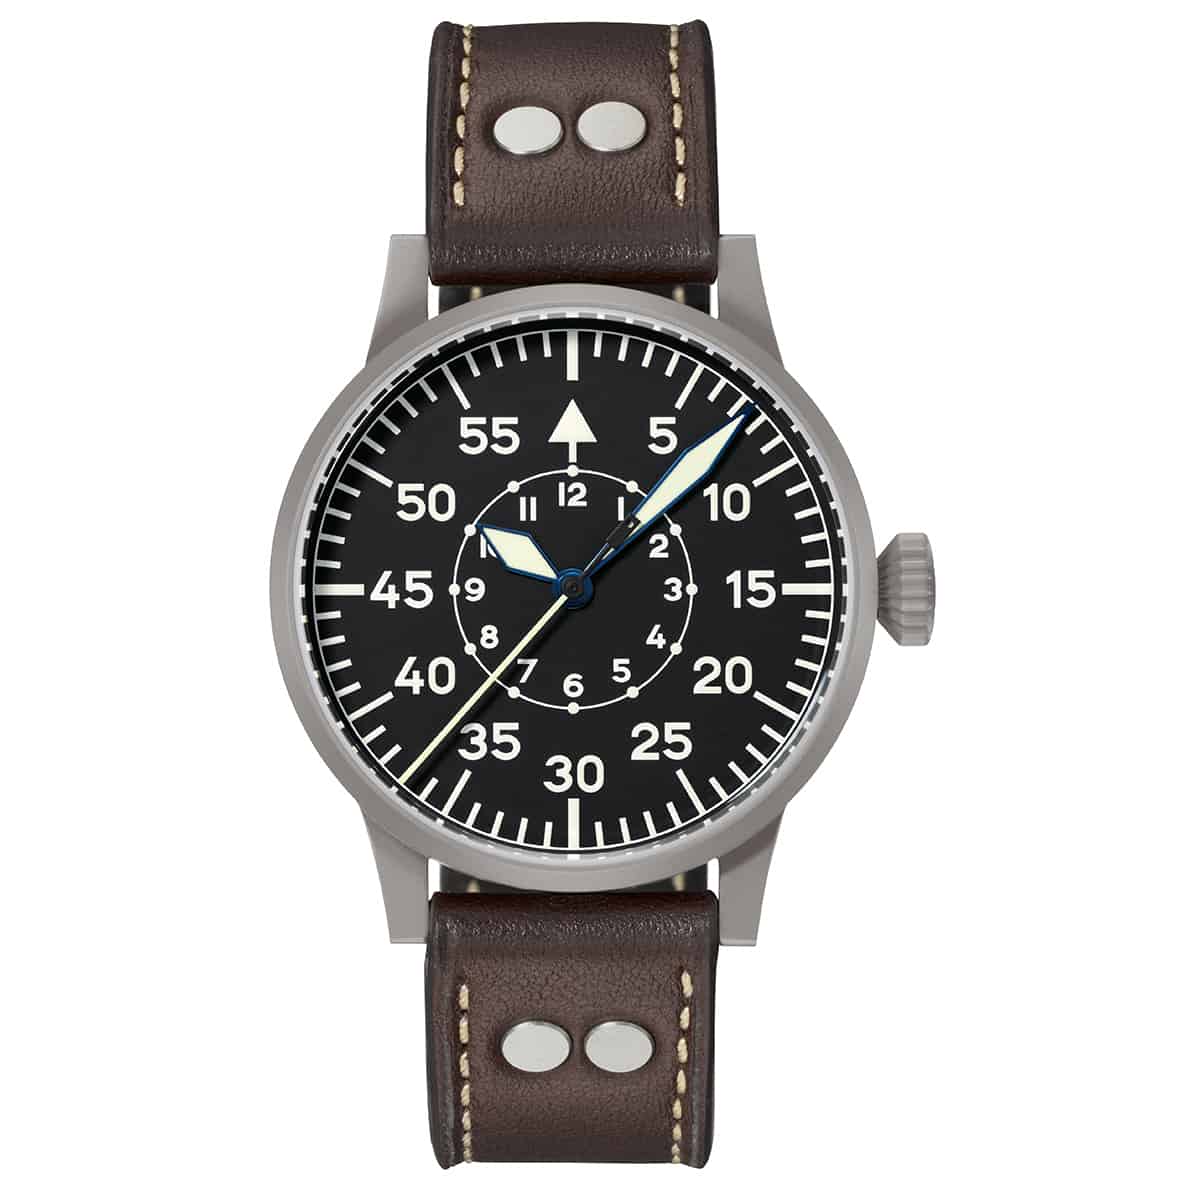 Laco-Paderborn-Type-B-Dial-Automatic-Pilot-Watch